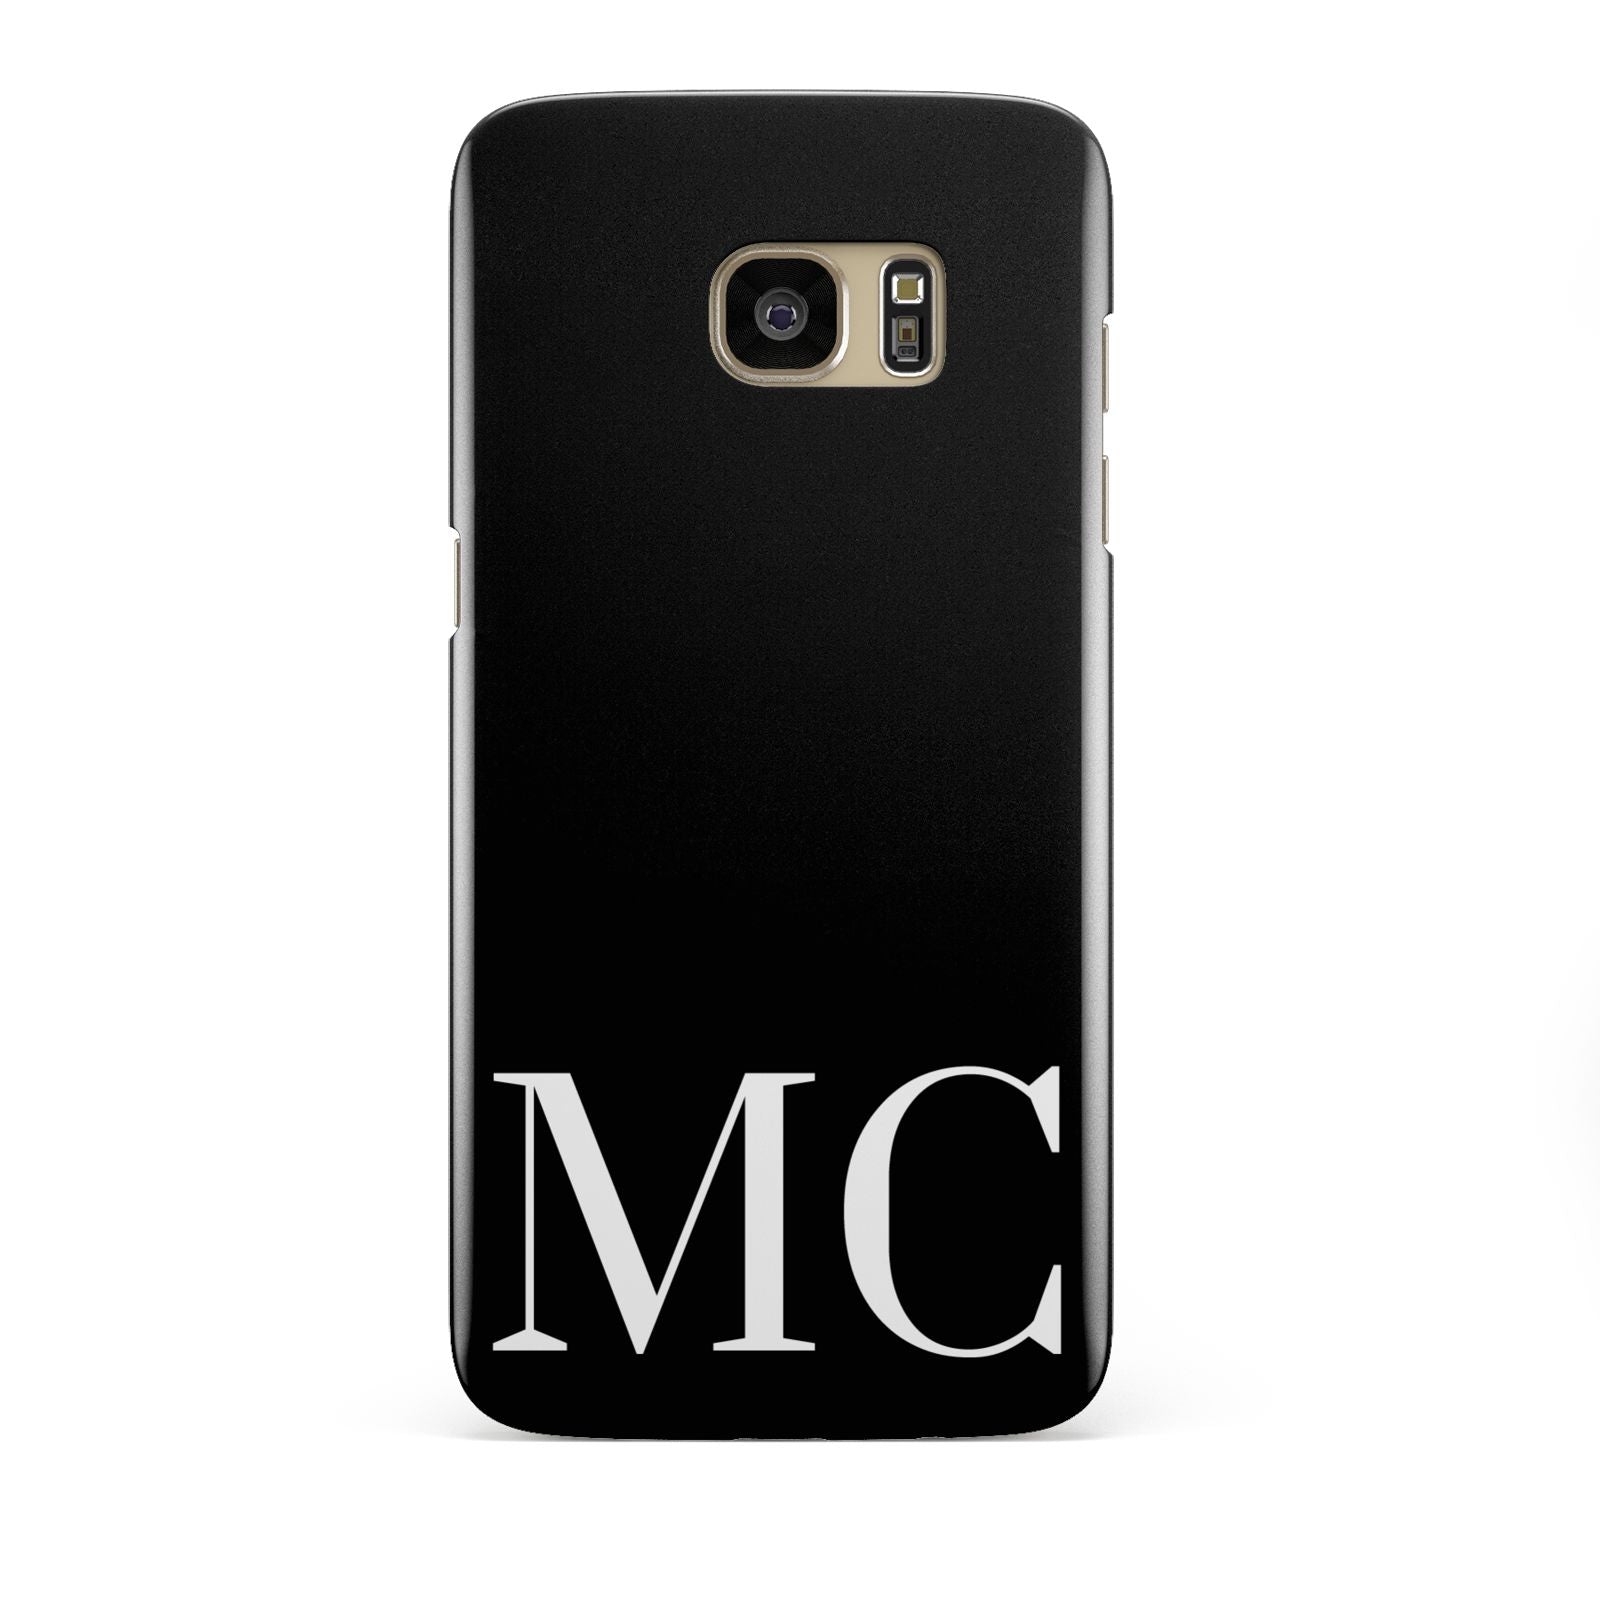 Initials Personalised 1 Samsung Galaxy S7 Edge Case